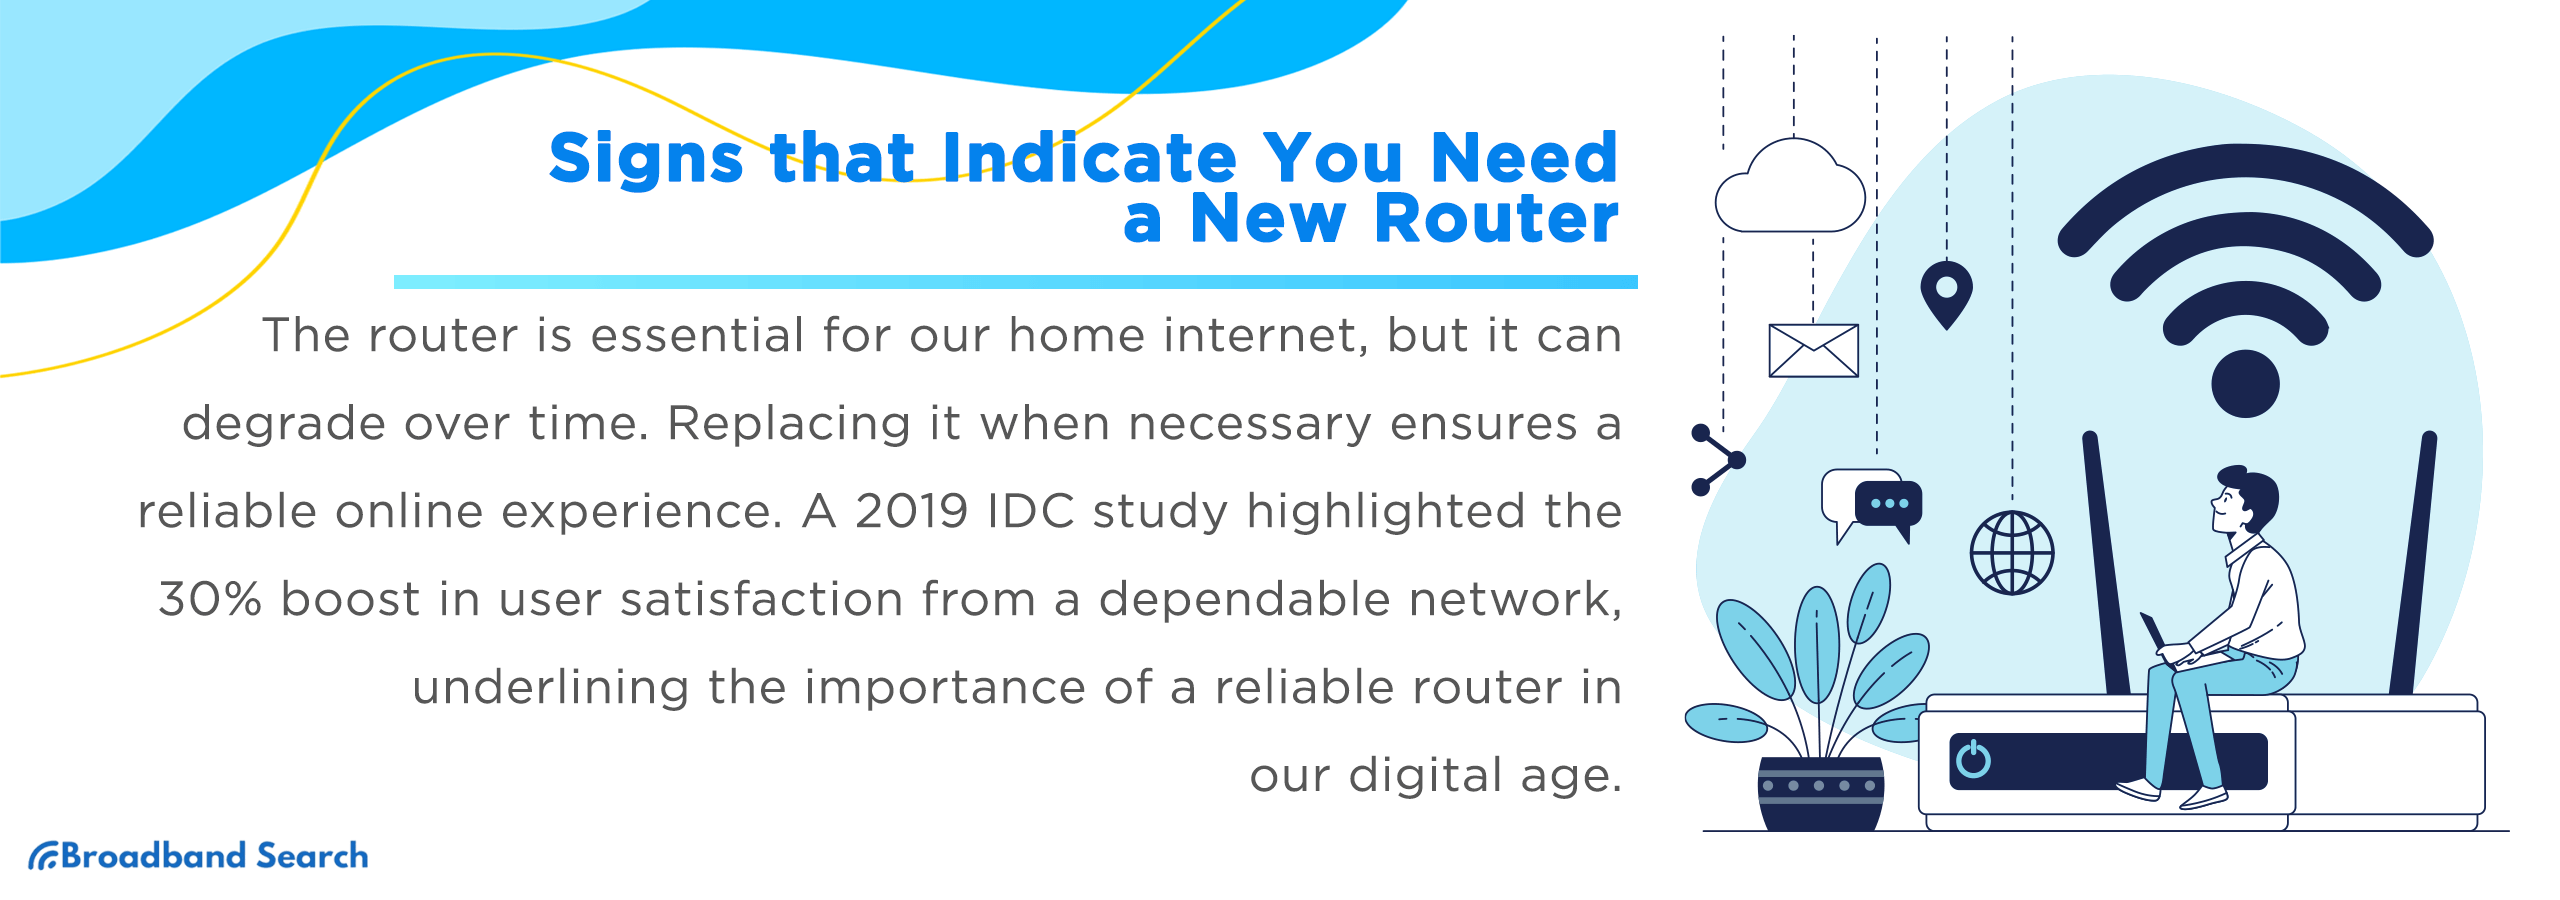 When to Swap: Signs Your Router Needs Replacing